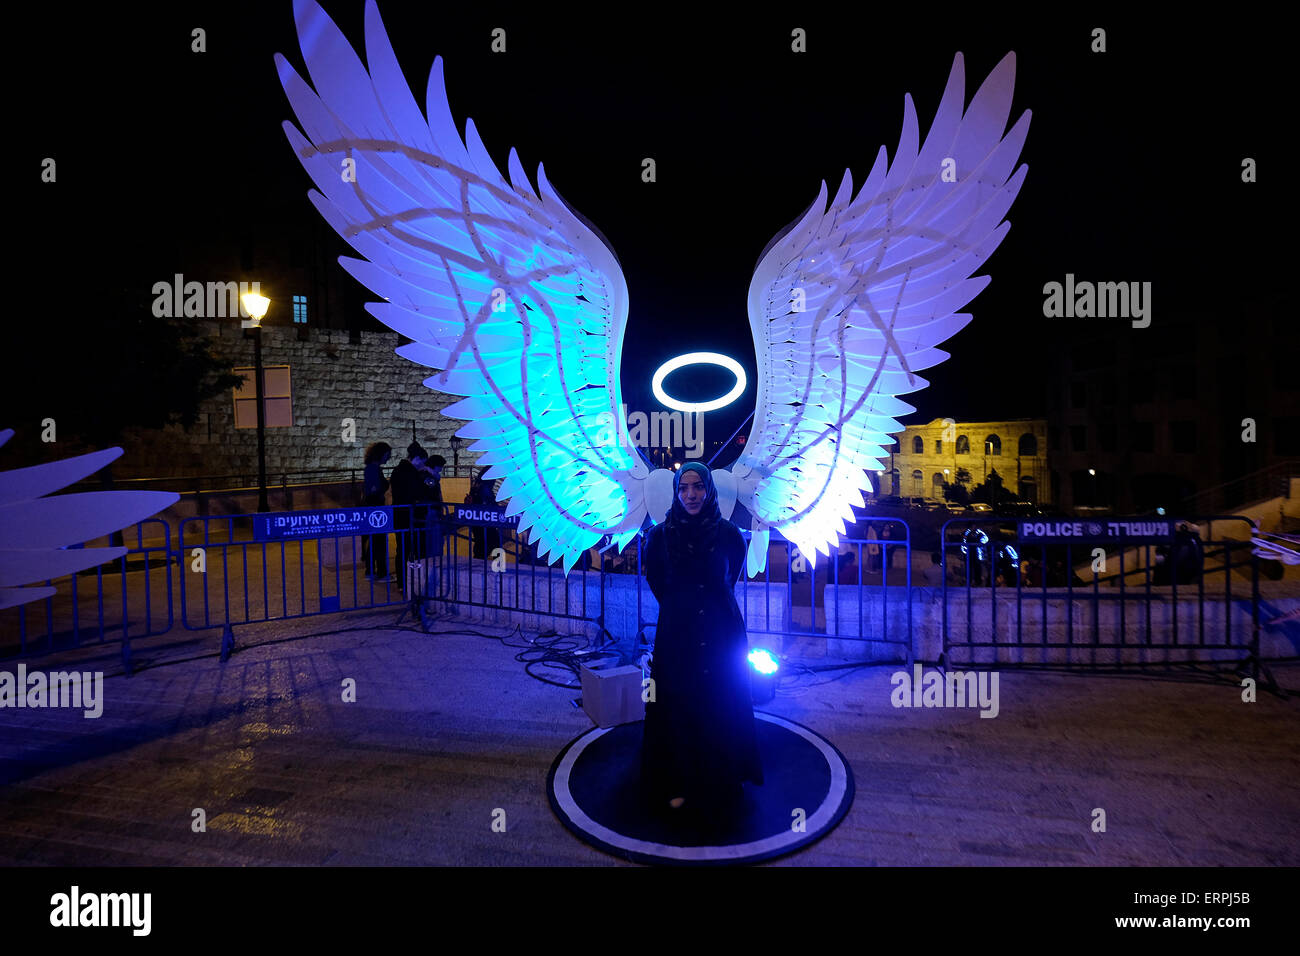 Jerusalem - ISRAEL 06 June 2015: A young Muslim woman posing with an illuminated figure depicting an angel in the old city during the Jerusalem Festival of Lights in Israel on 06 June 2015. The festival is held annually around Jerusalem's old city with special effects illuminating historical sites. Stock Photo